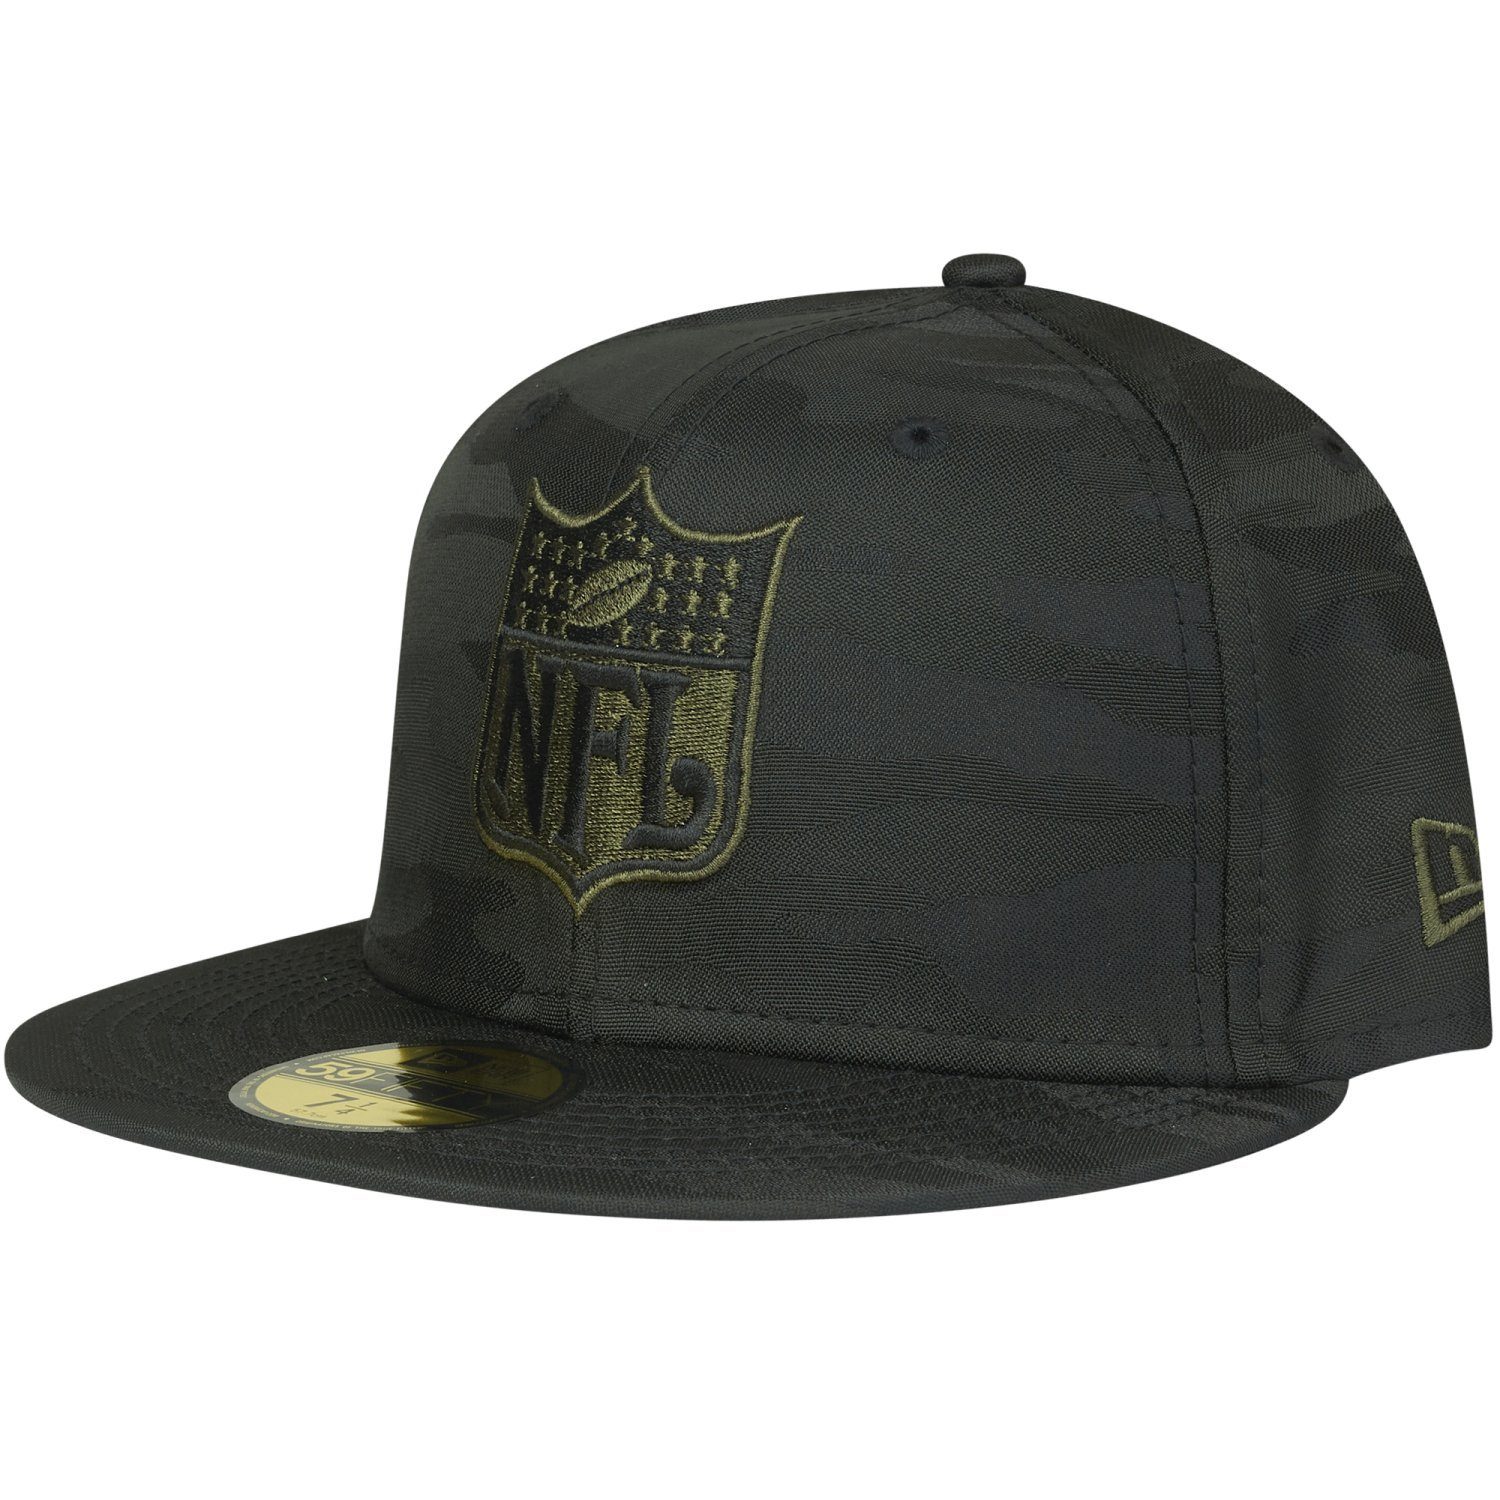 59Fifty Cap Shield Era NFL NFL New Fitted TEAMS alpine